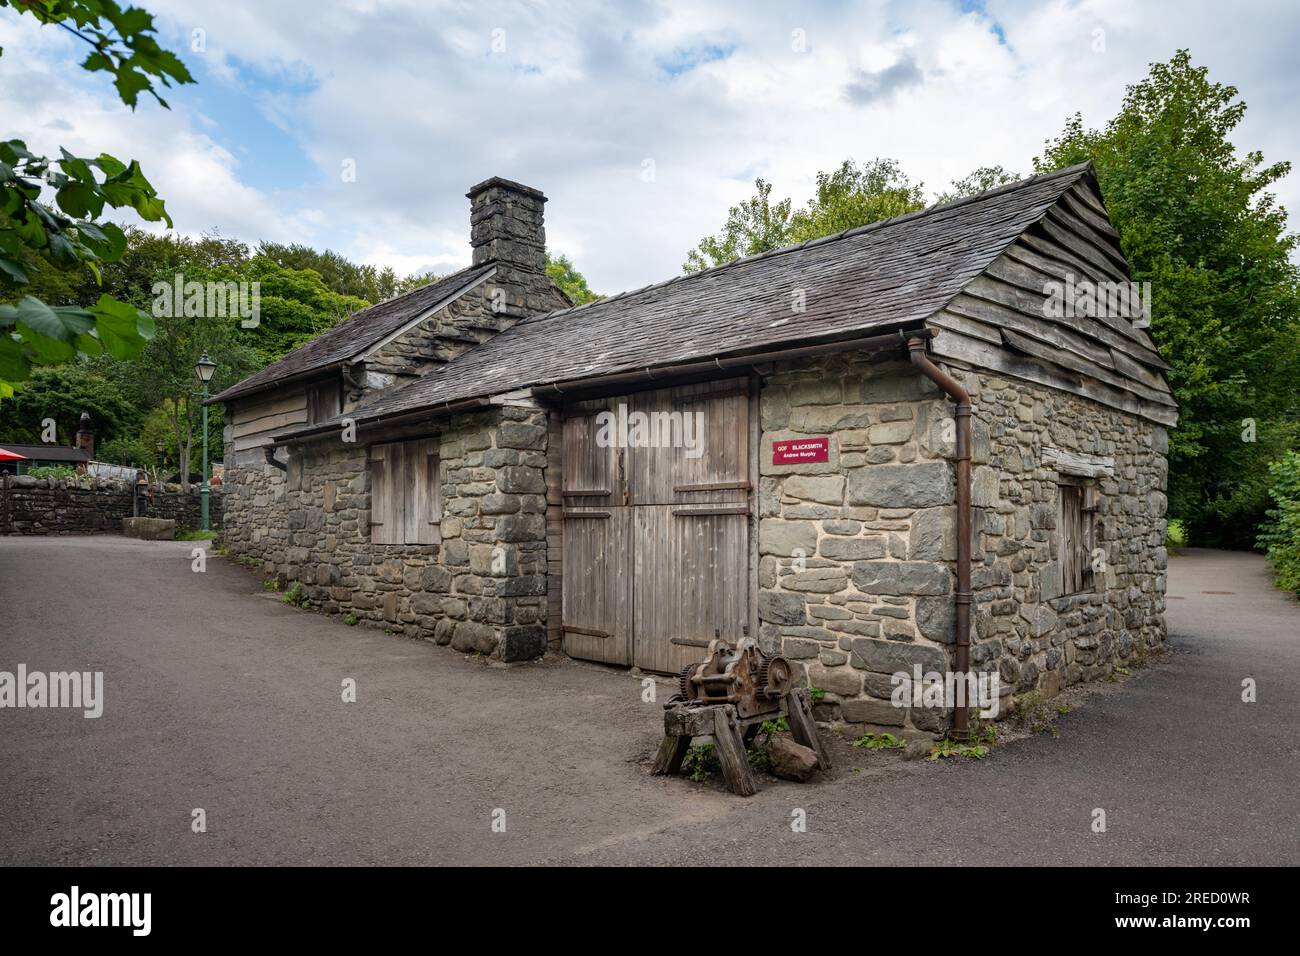 Llawr-y-glyn Smithy, St. Fagans National Museum of History, Cardiff, pays de Galles, Royaume-Uni Banque D'Images